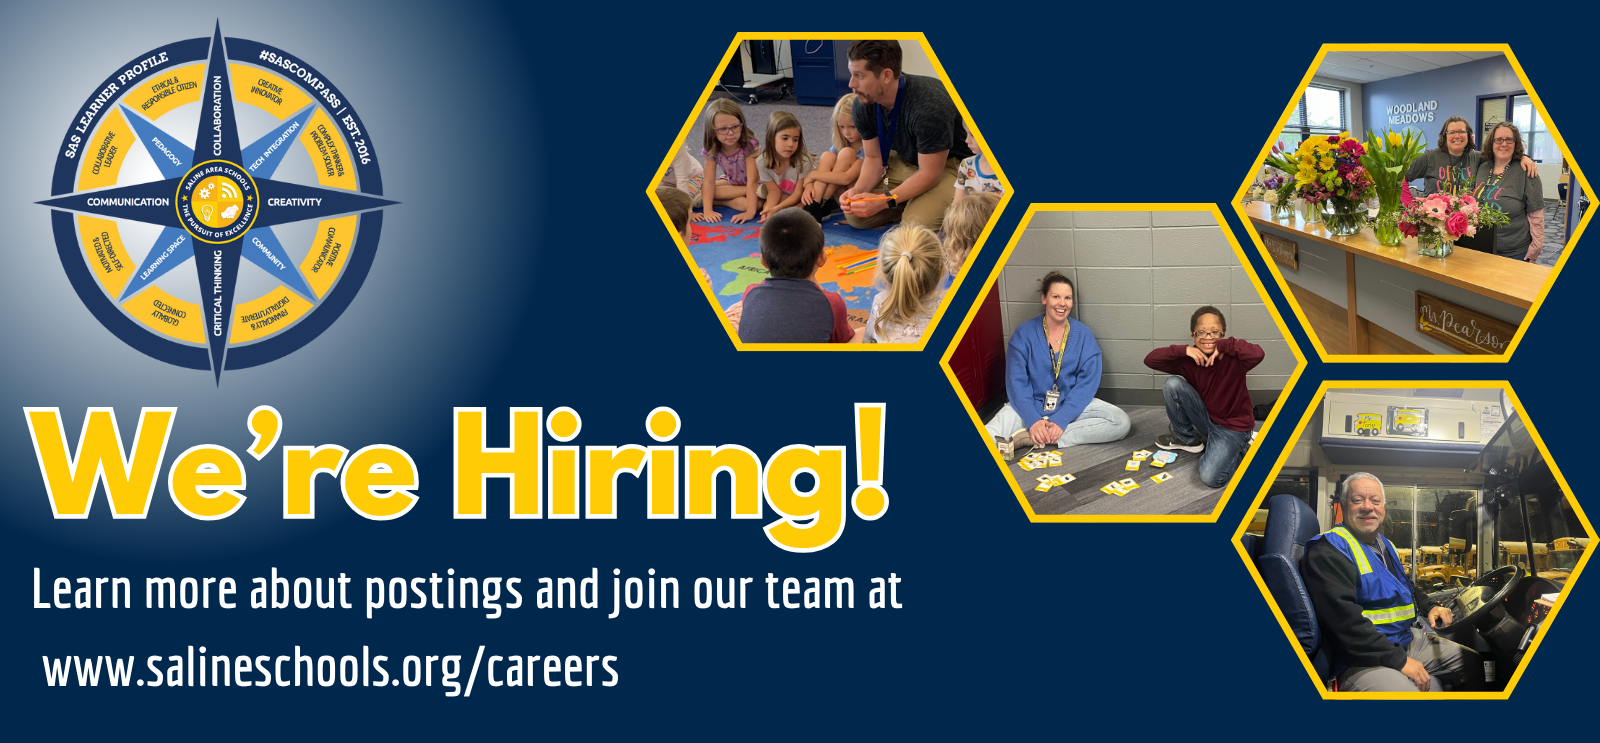 we're hiring learn more about postings and join our team at www.salineschools.org/careers